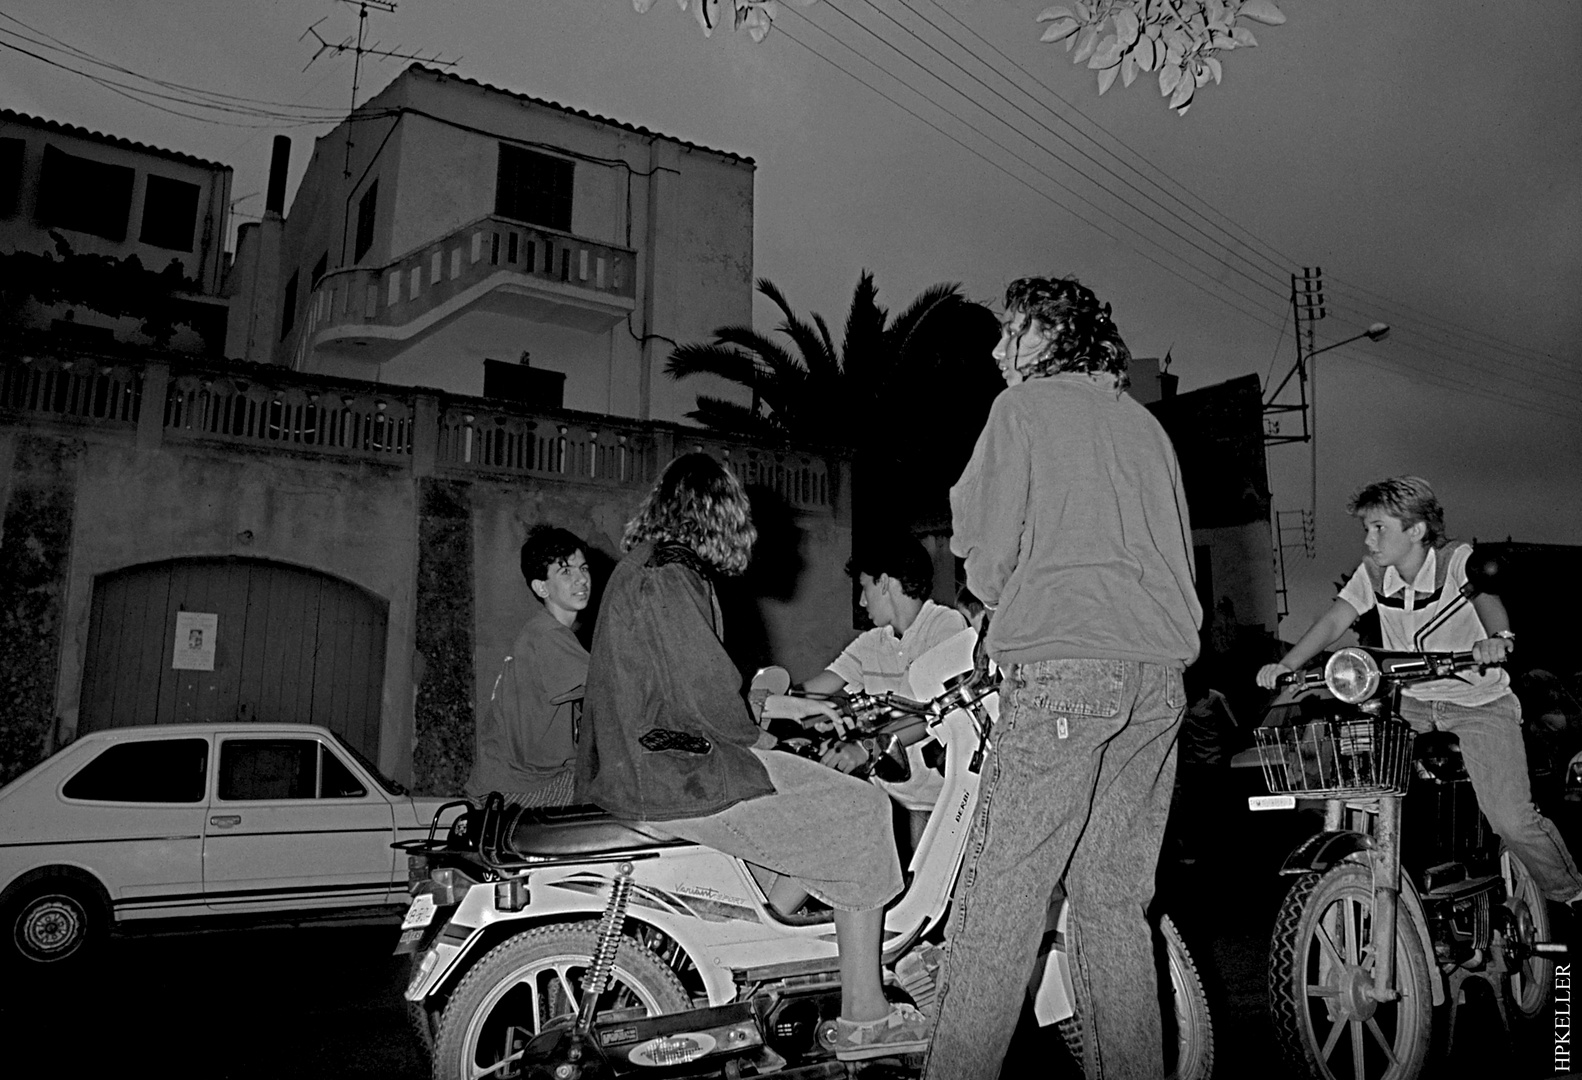 Many years ago in Cala Figuera (Mallorca), ...moped enthusiastic young people - Analogscan 1983.